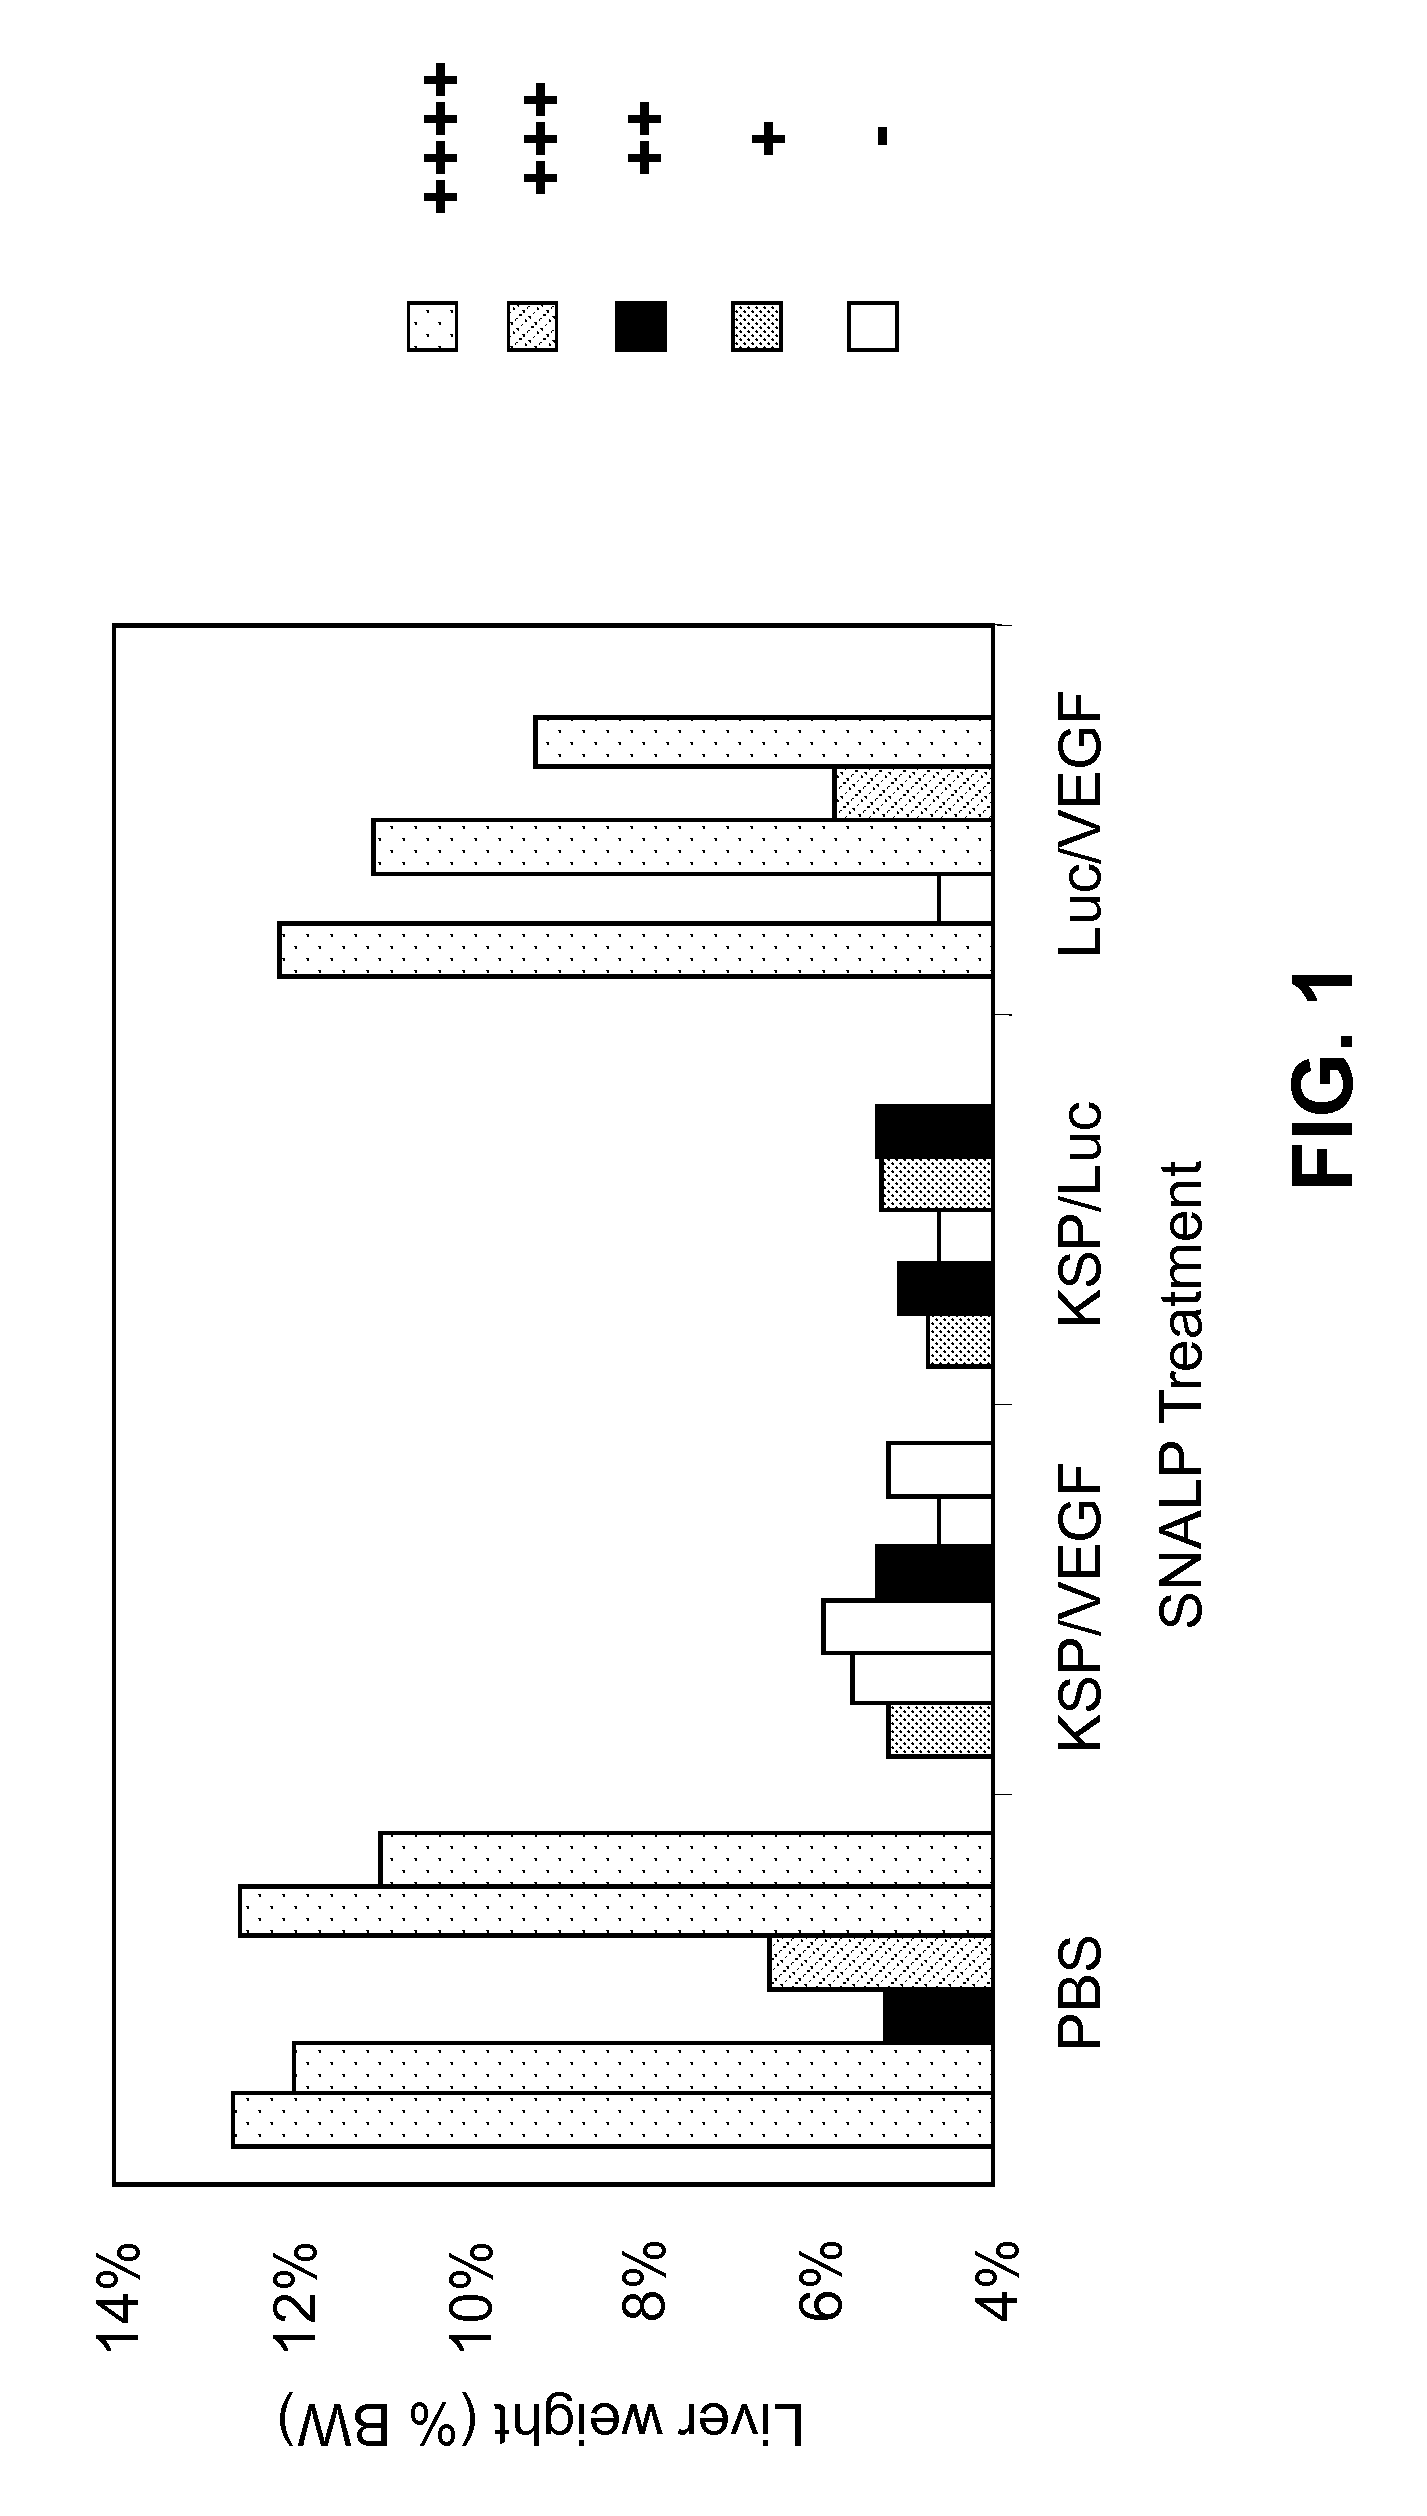 Lipid formulated compositions and methods for inhibiting expression of Eg5 and VEGF genes